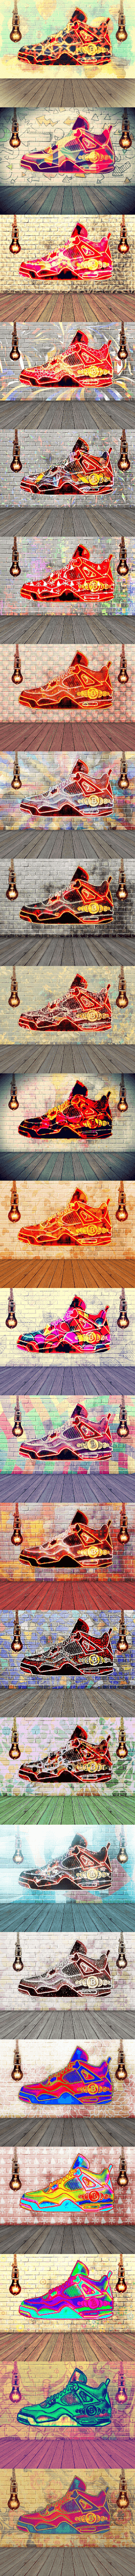 decorated shoes collection image